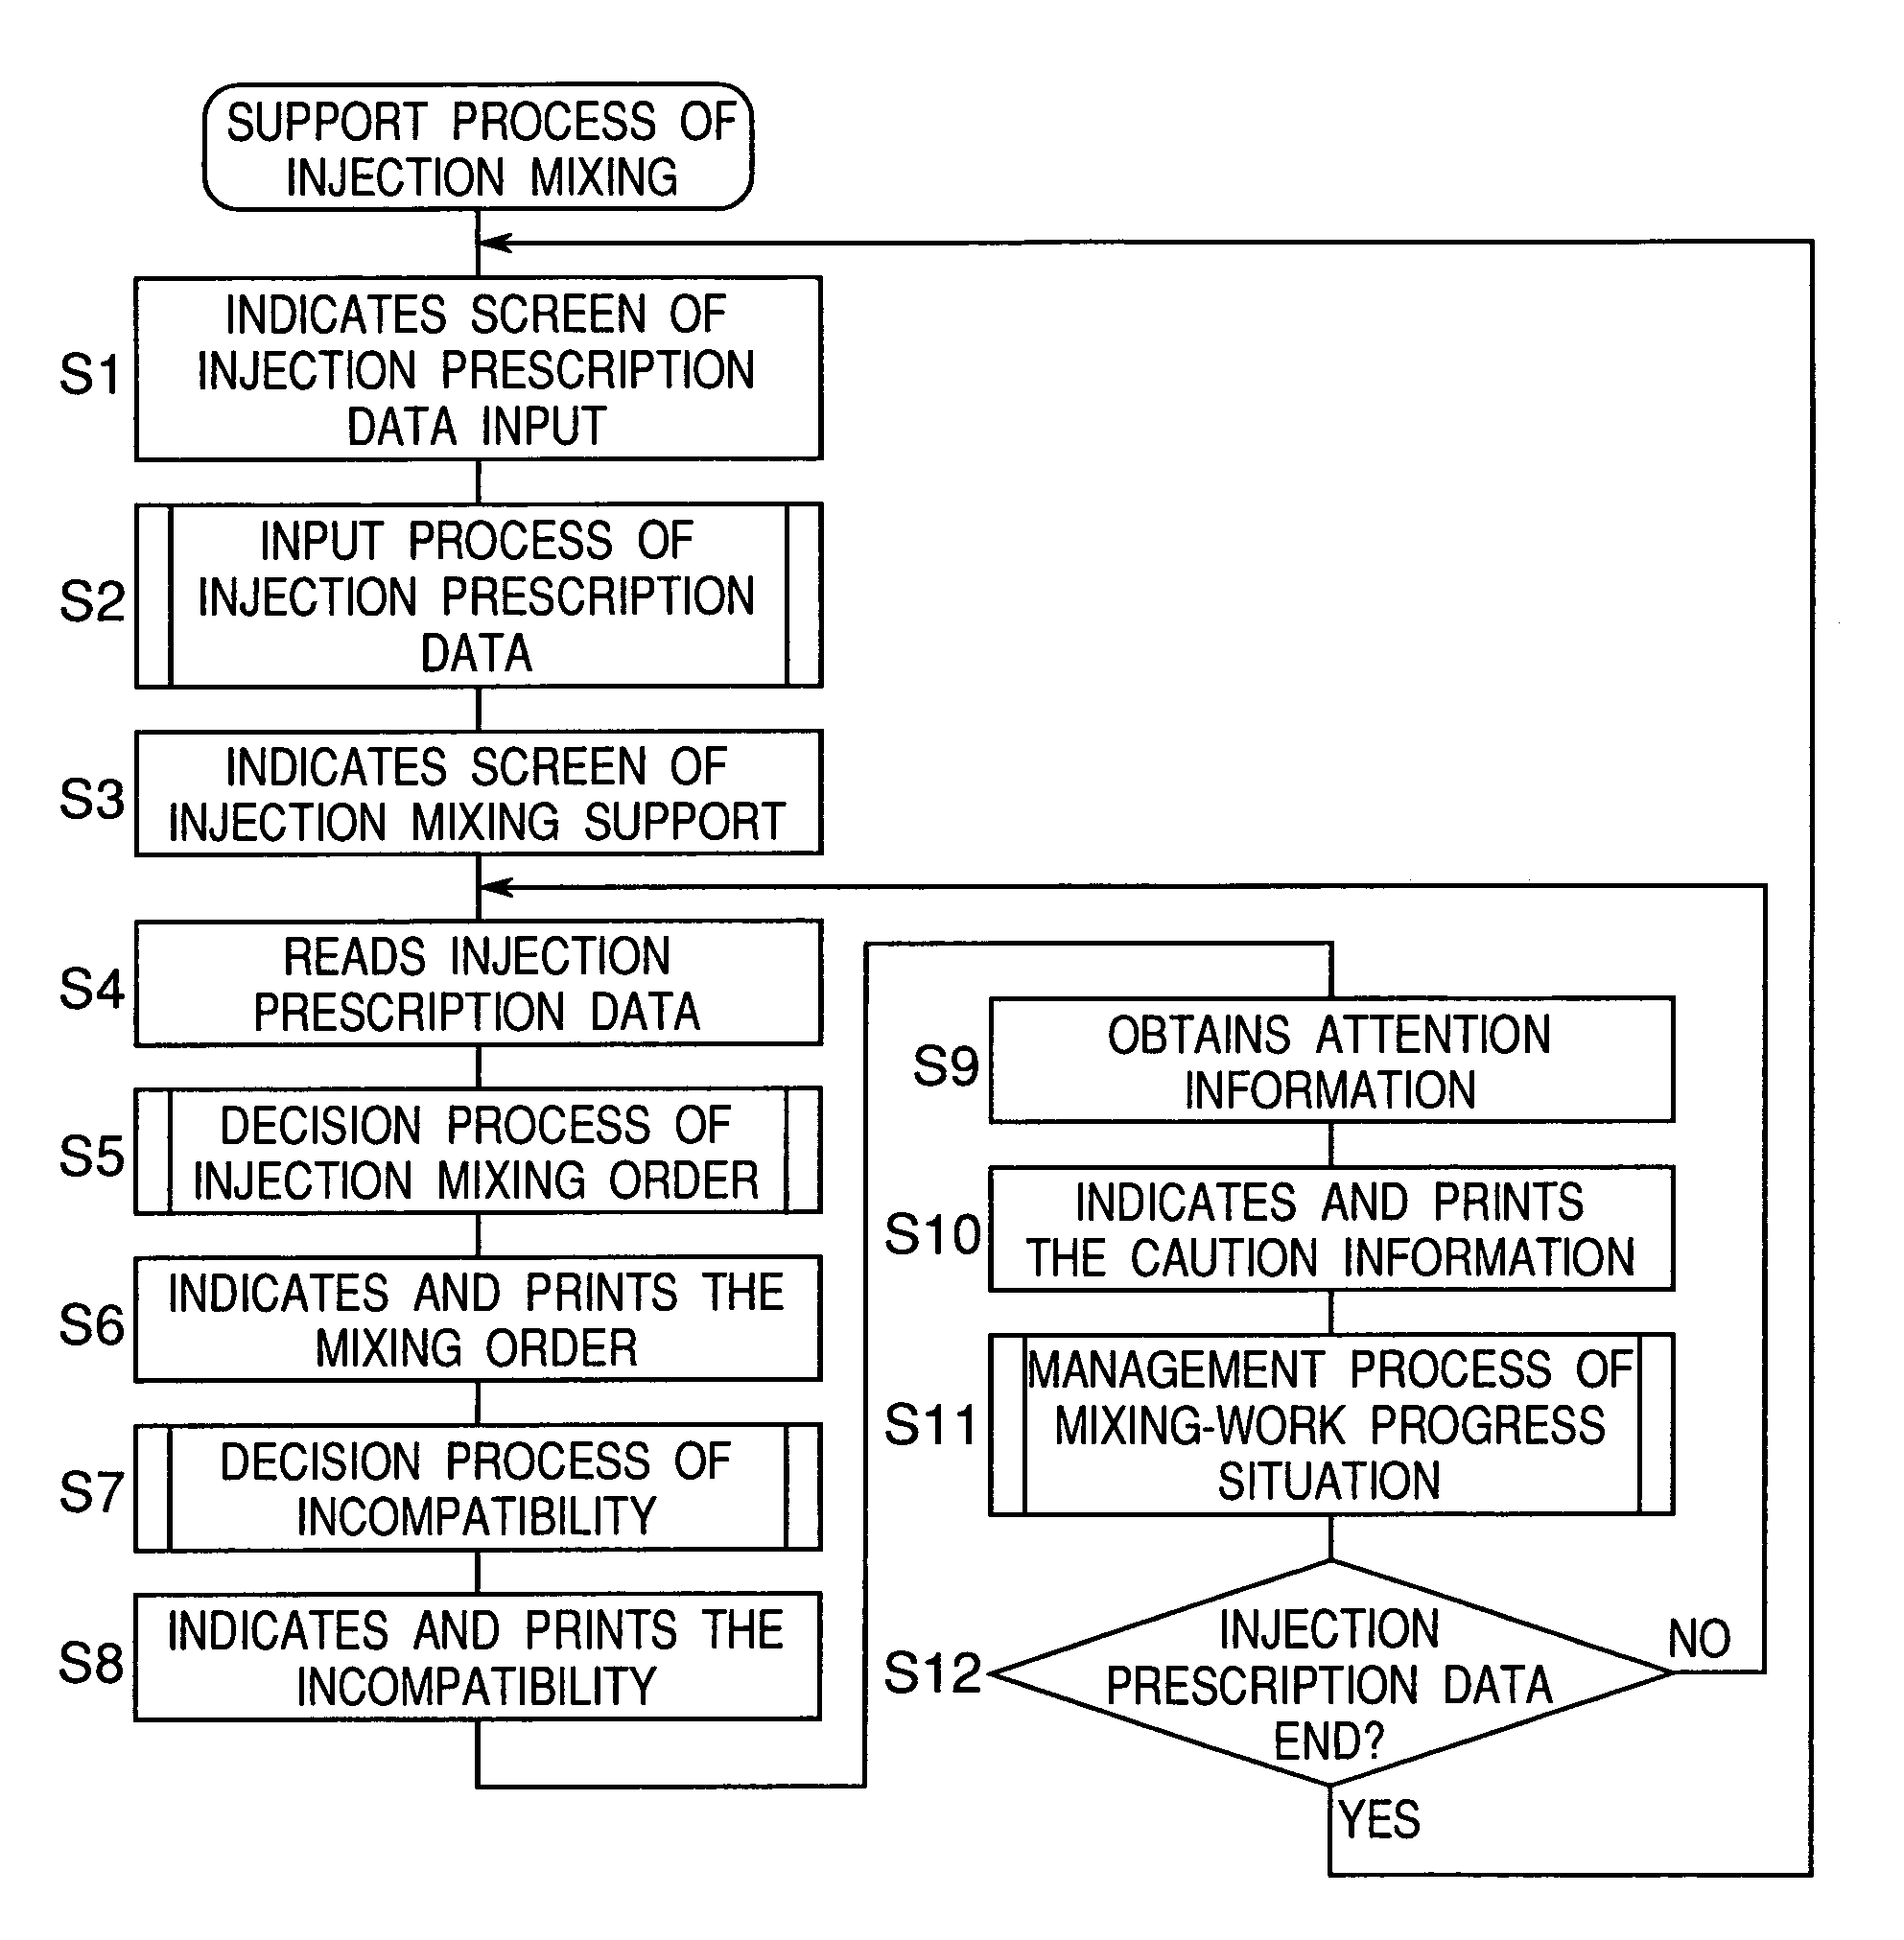 Apparatus for supporting injection mixing work